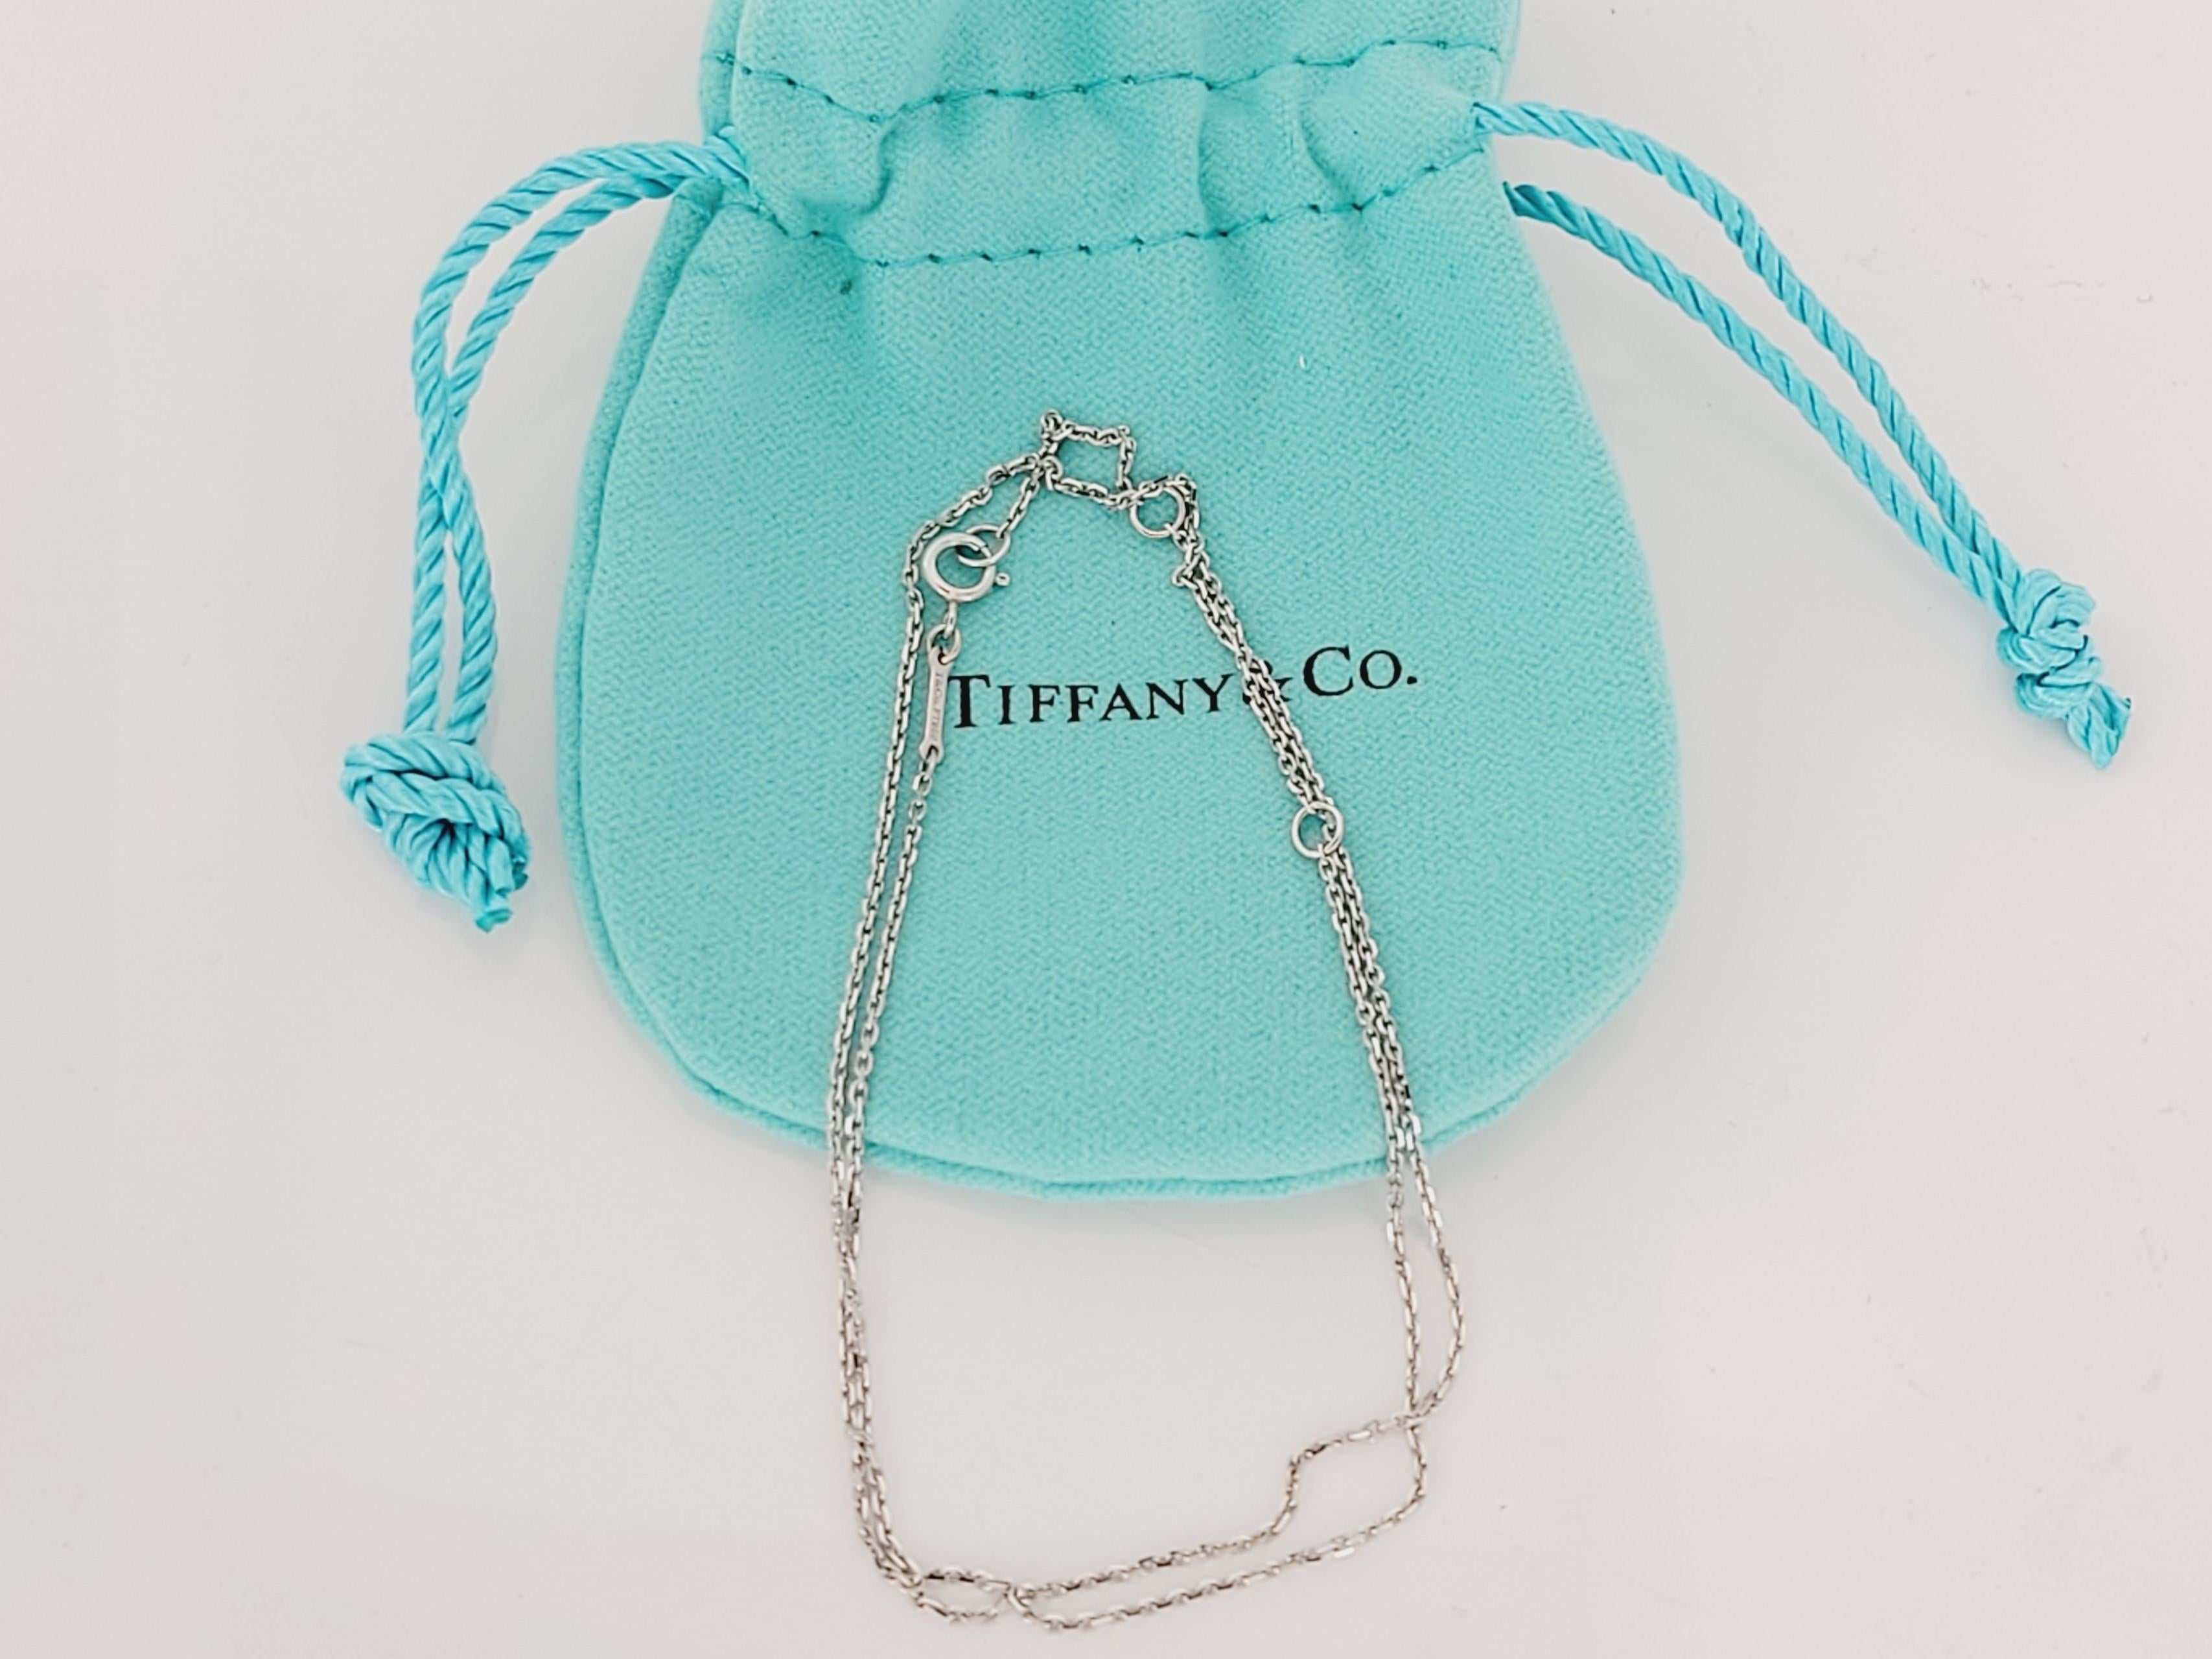 Brand Paloma Picasso Tiffany &co 
Material PT950
Chain Length 16''
Adjustable 16'', 15'',14''
Weight 1.8gr
Comes with Tiffany& co pouch